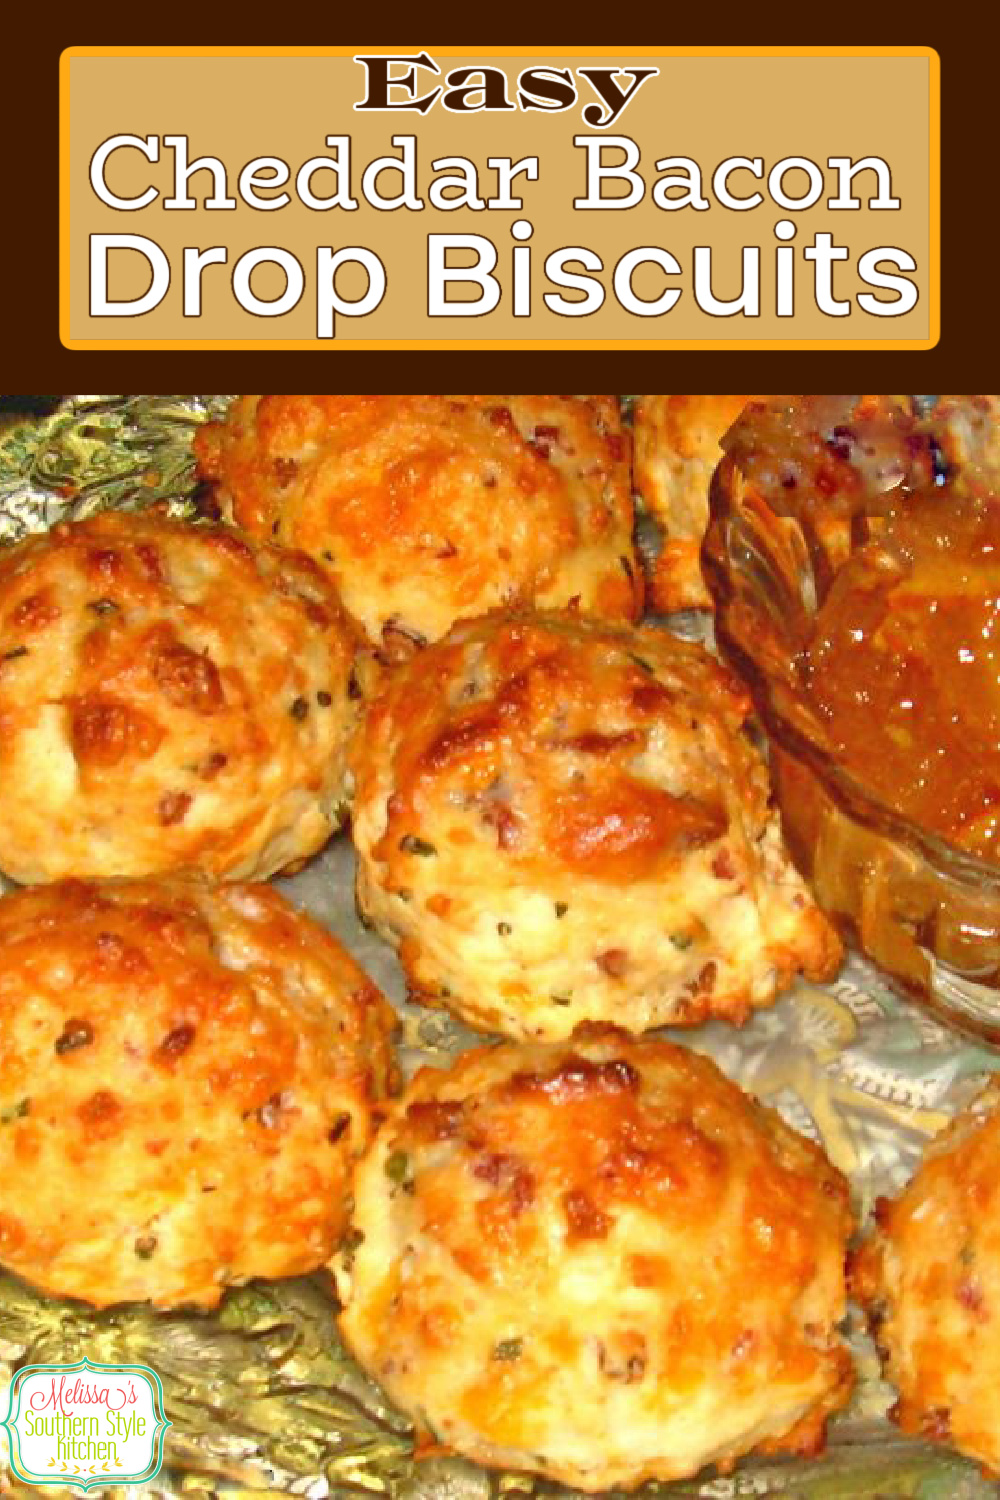 Cheddar cheese, bacon and fresh chives are the perfect trio of flavors in these easy drop biscuits #dropbiscuits #cheddarbaconbiscuits #easybiscuitrecipes #brunch #breakfast #bacon #easyrecipes #southernfood #southernrecipes #biscuits via @melissasssk